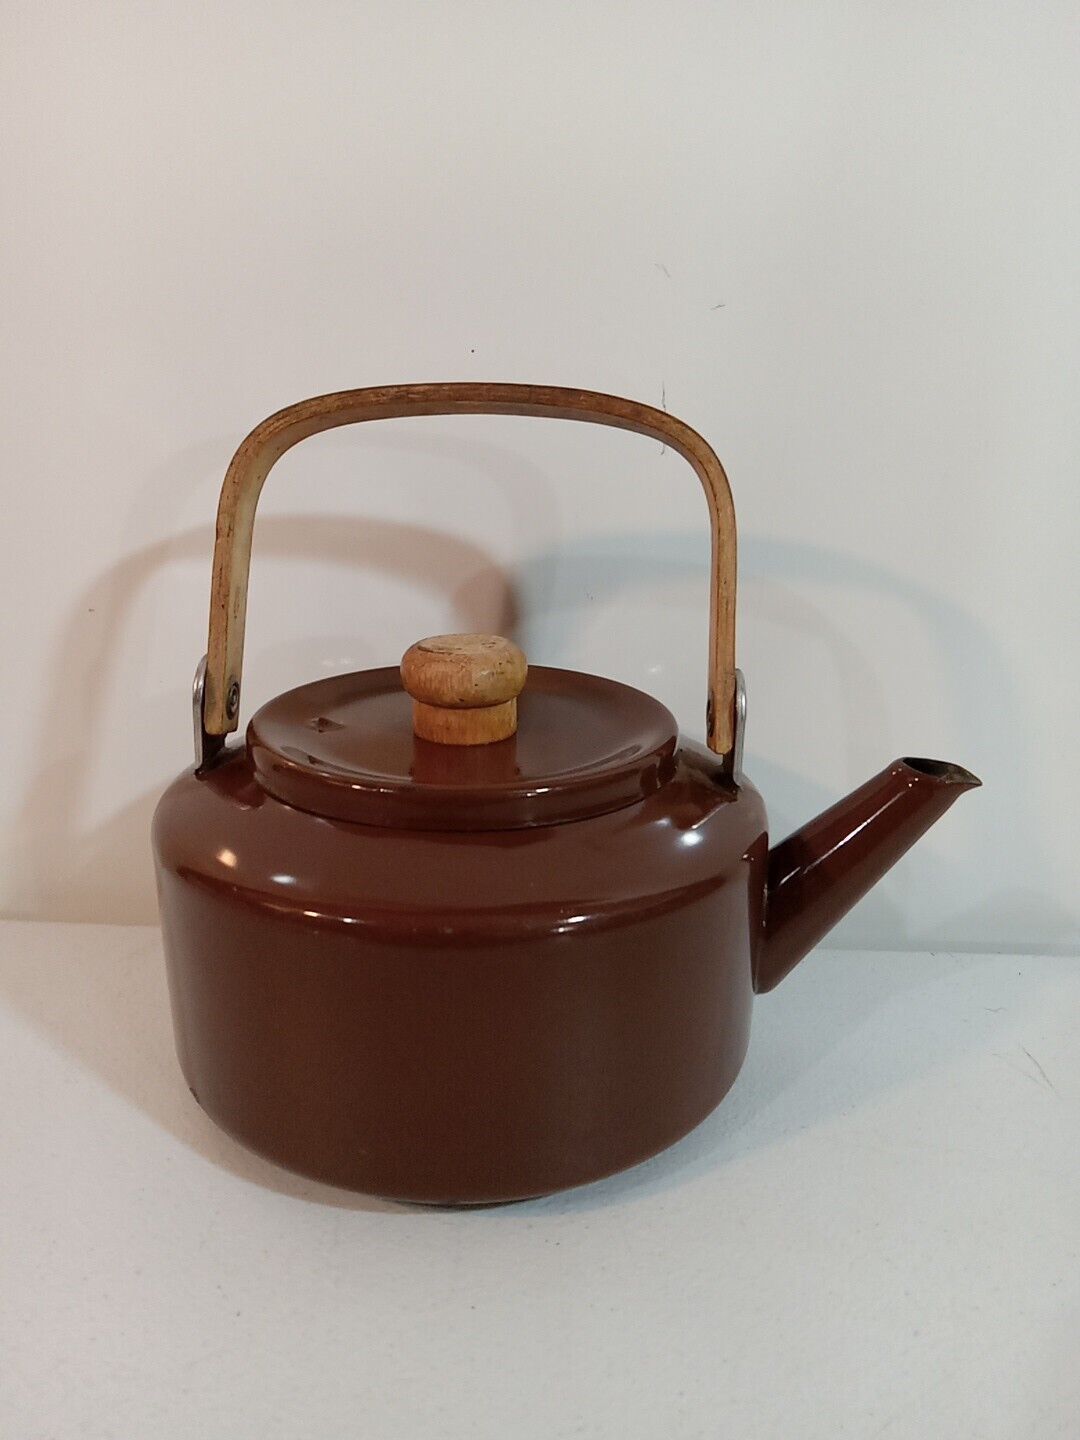 Vintage Michael Lax Copco 117 Brown Kettle with Wooden Handle